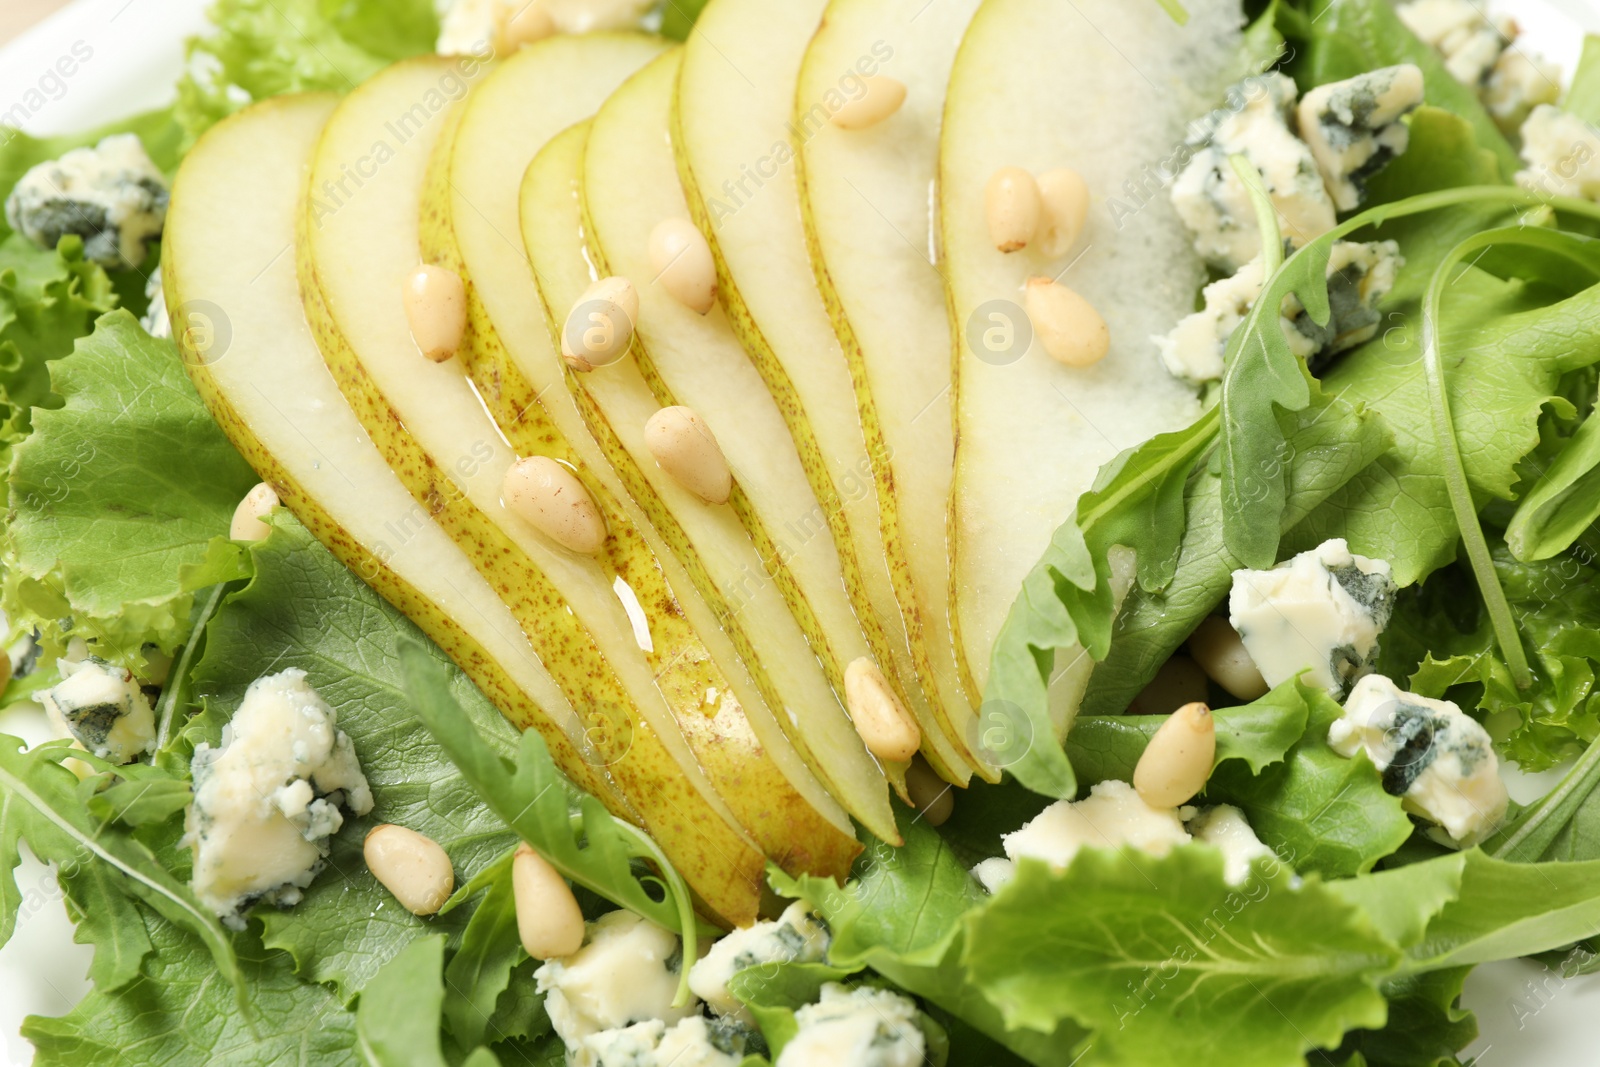 Photo of Delicious fresh salad with pear slices as background, closeup view